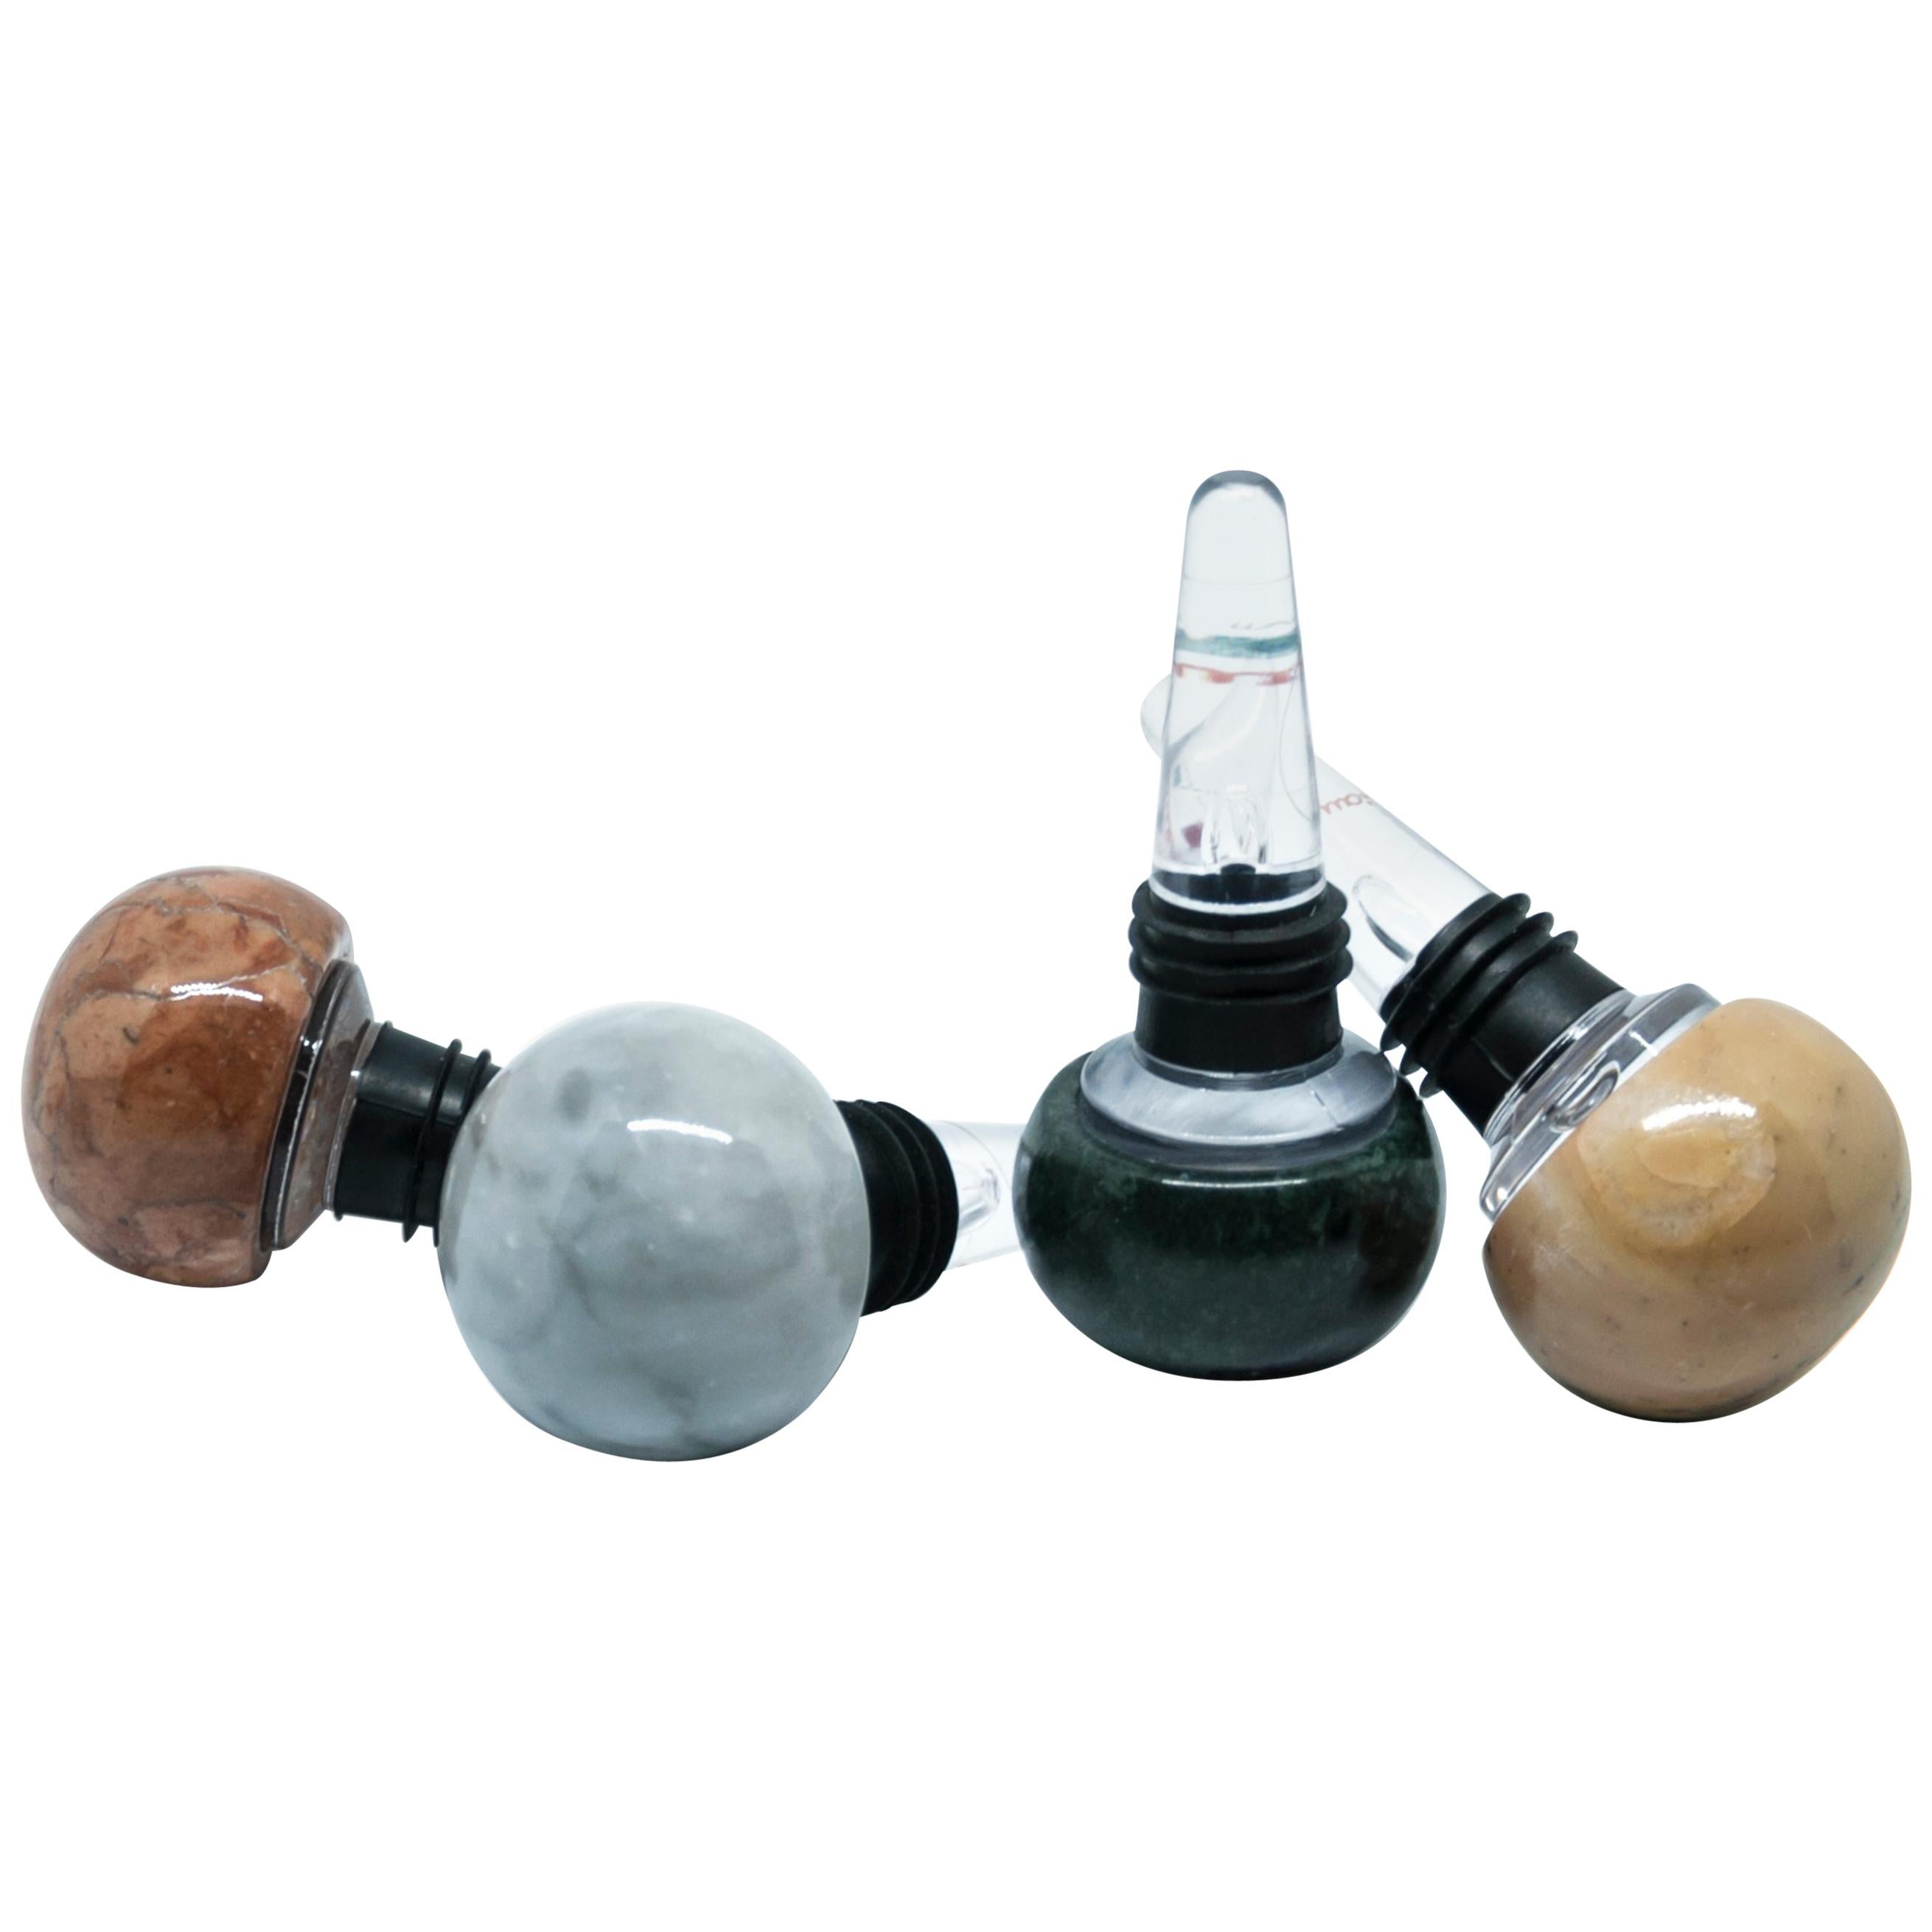 Handmade Set of 4 Mixed Marbles and Plexiglass Champagne Bottle Stoppers